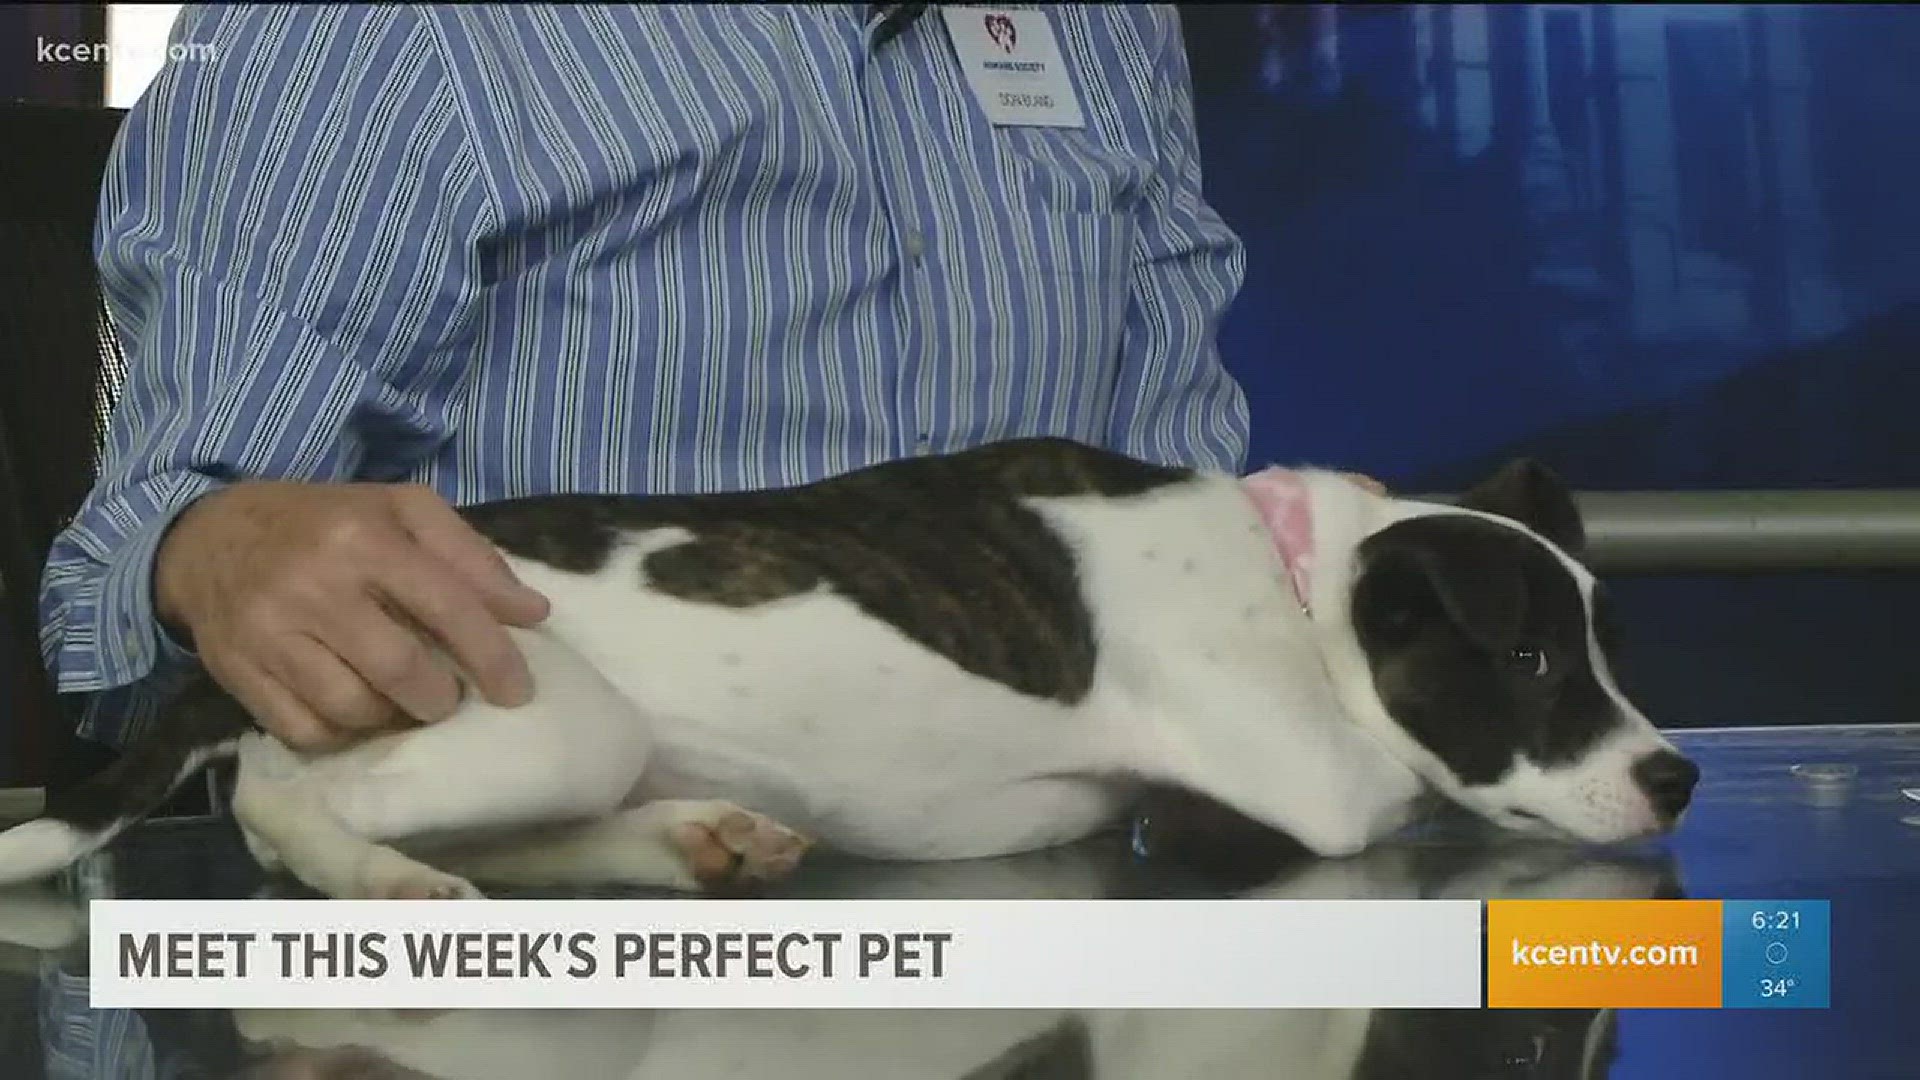 Adopt Claire from the Humane Society of Central Texas.